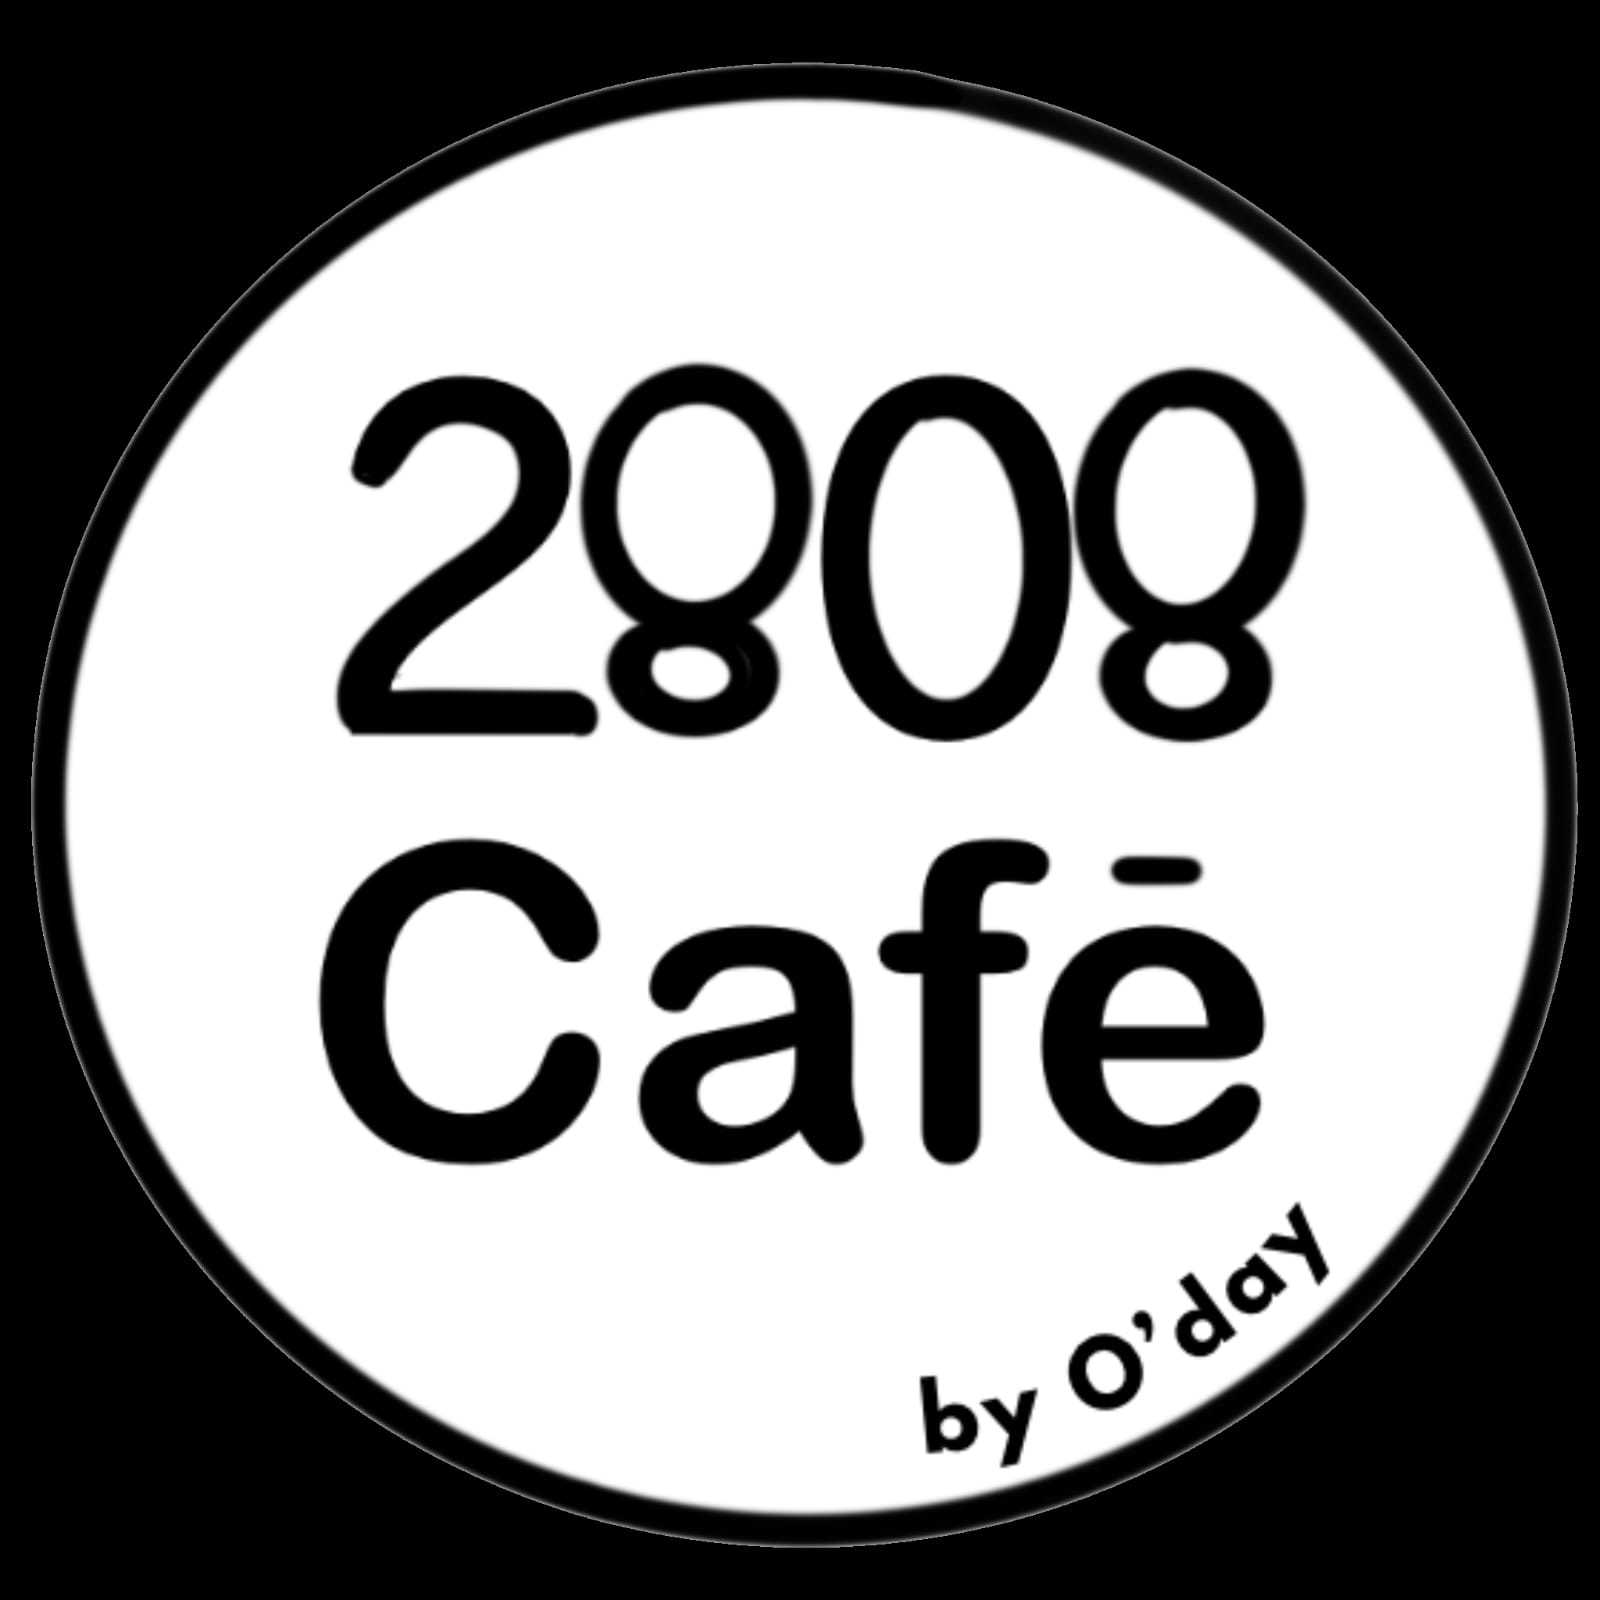 2808 Cafe By O Day